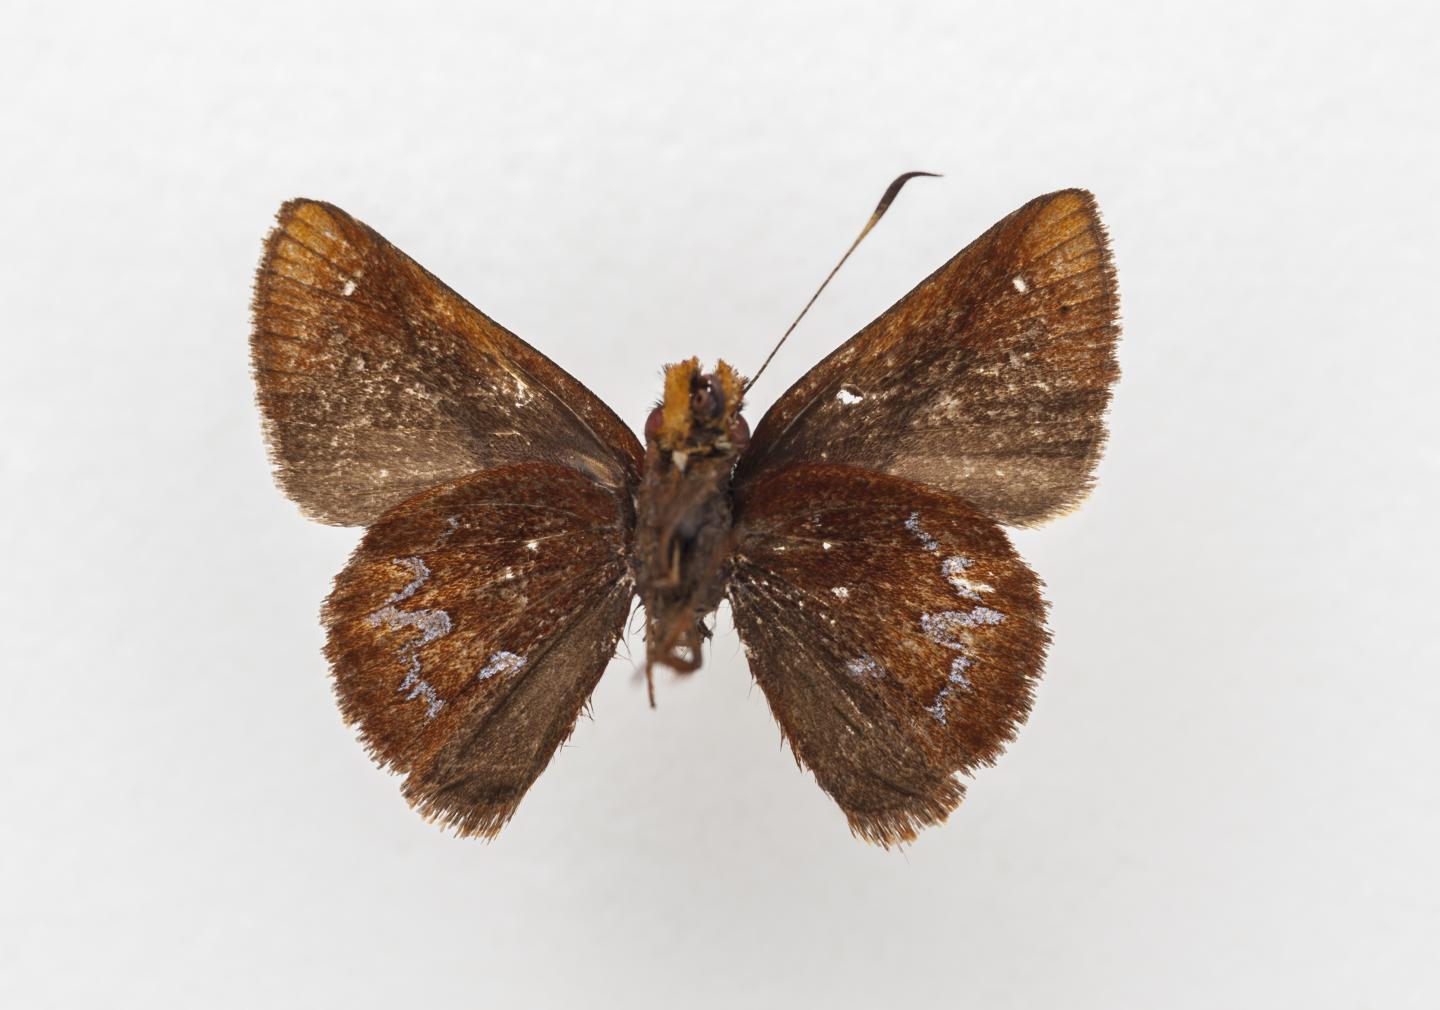 New Butterfly Species Named for Emily Graslie